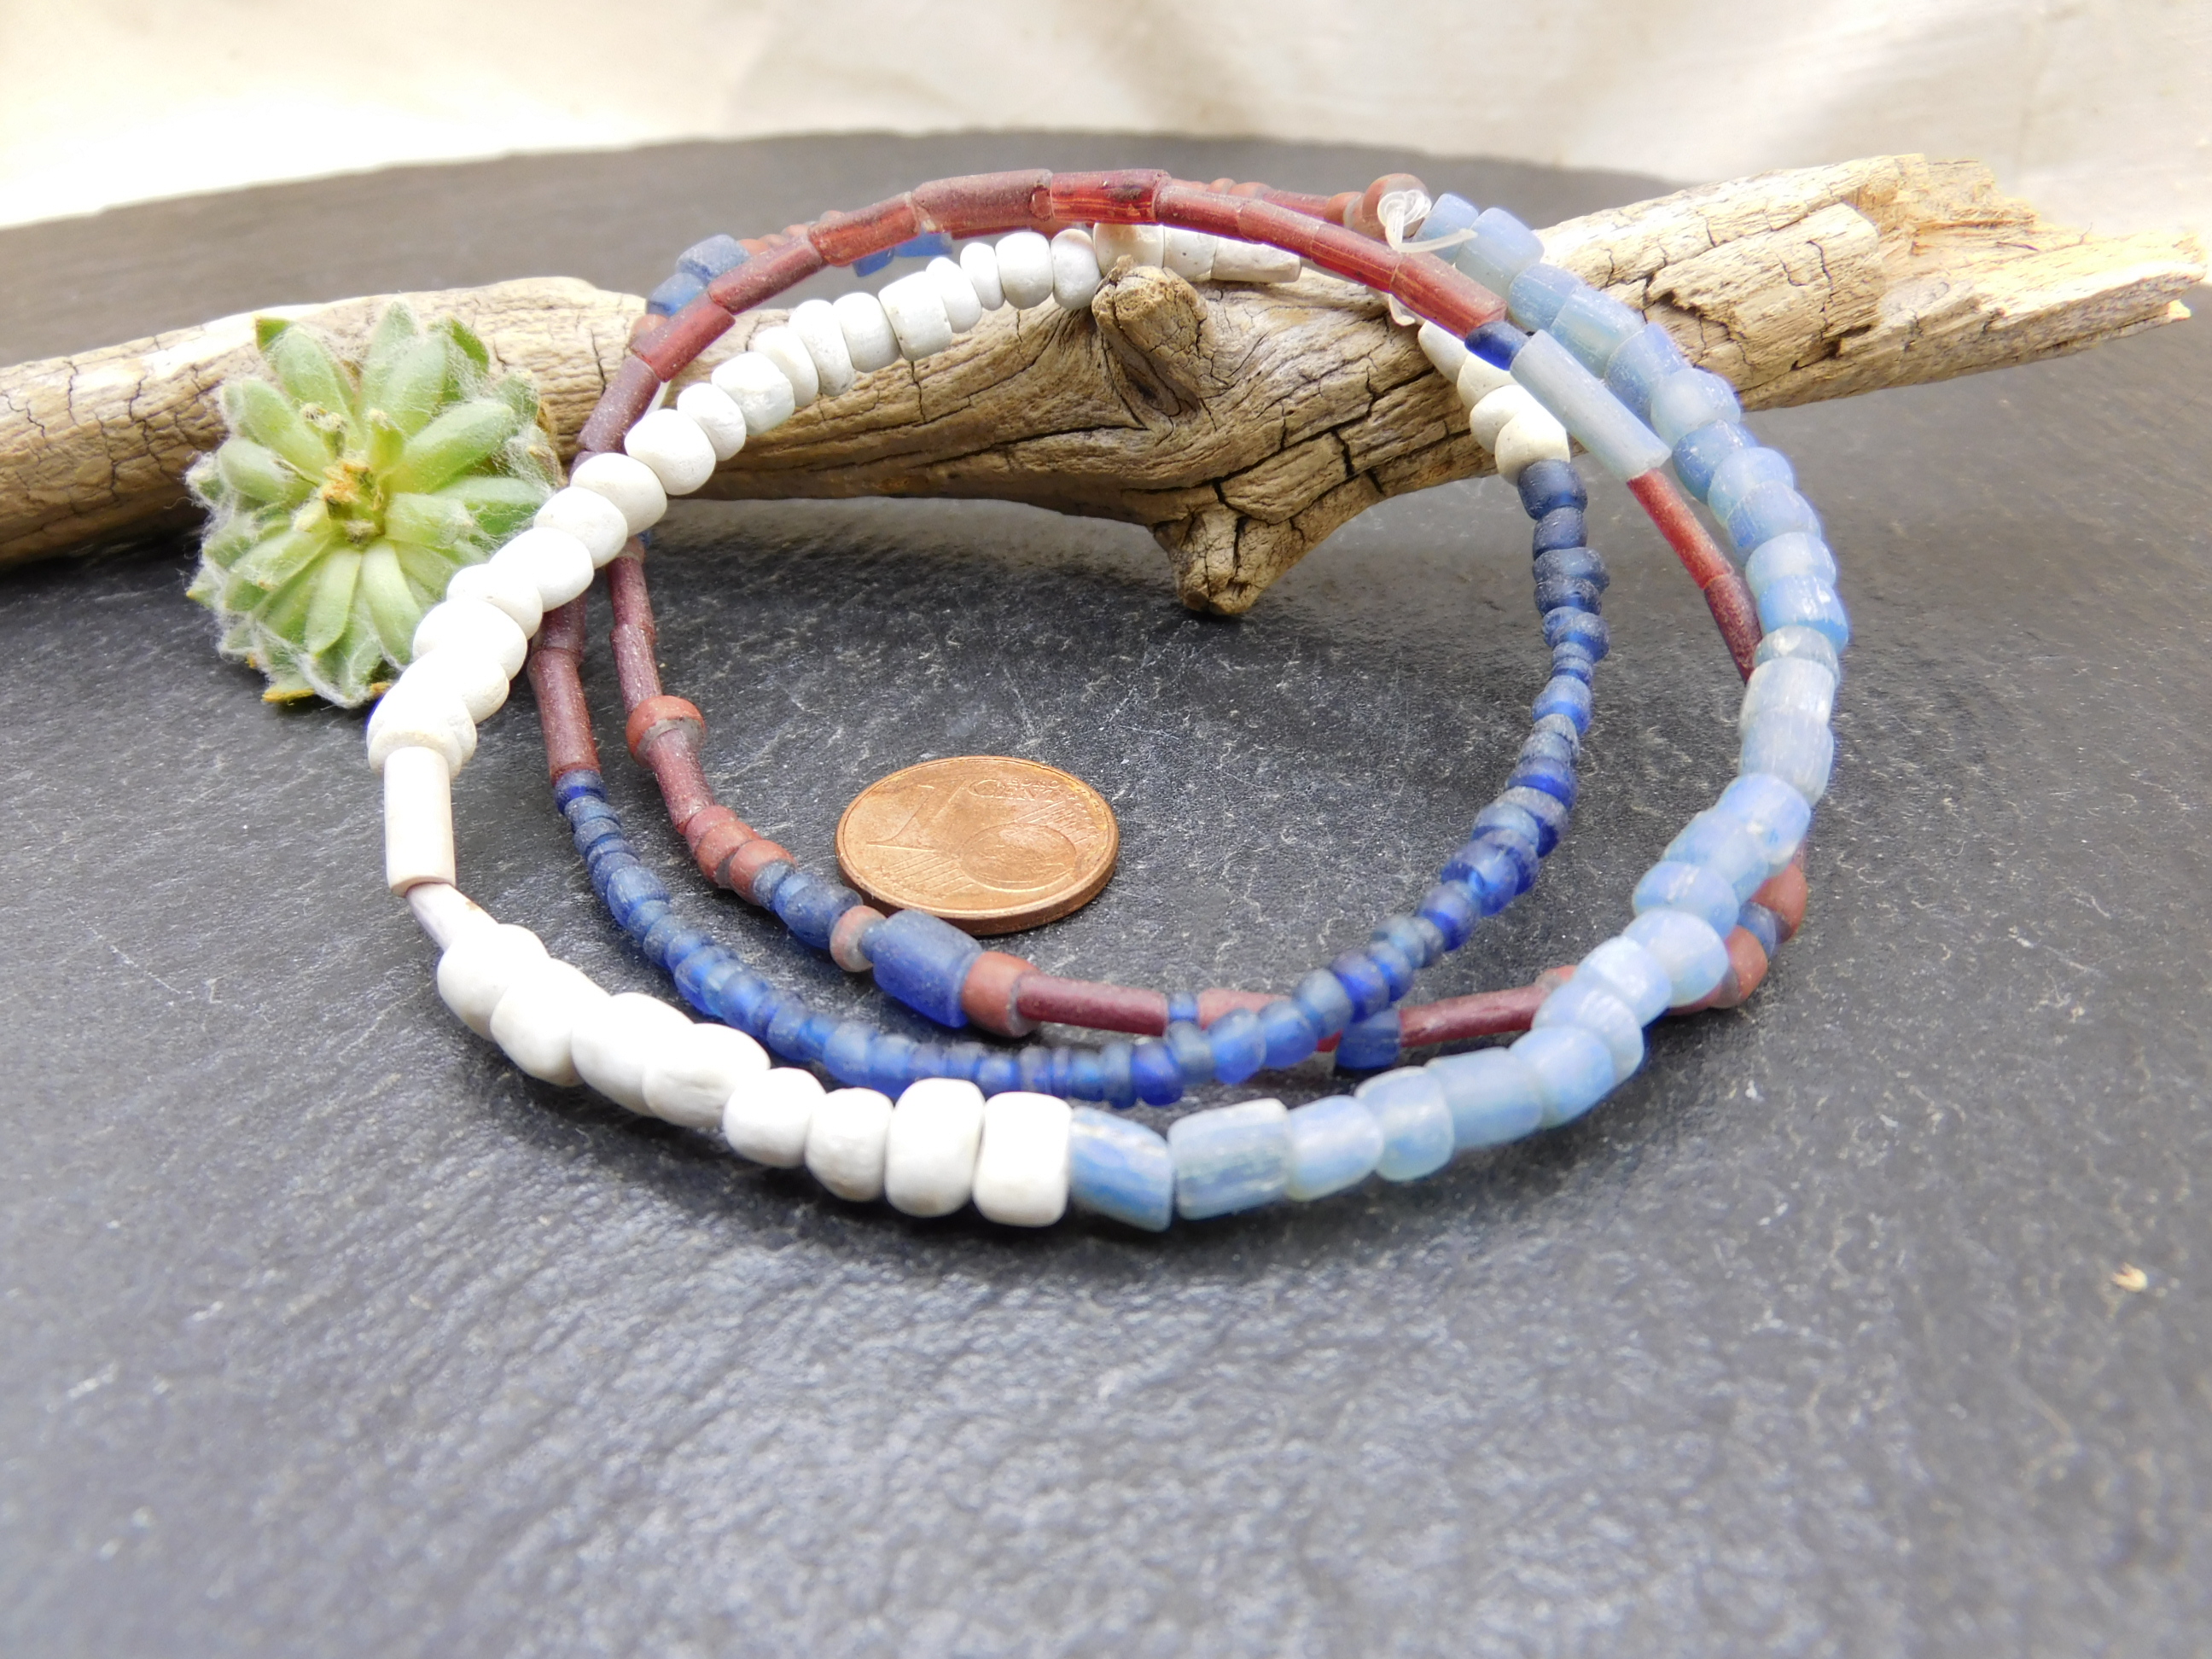 antique glass beads from Djenné Mali Africa - blue red white Nila beads